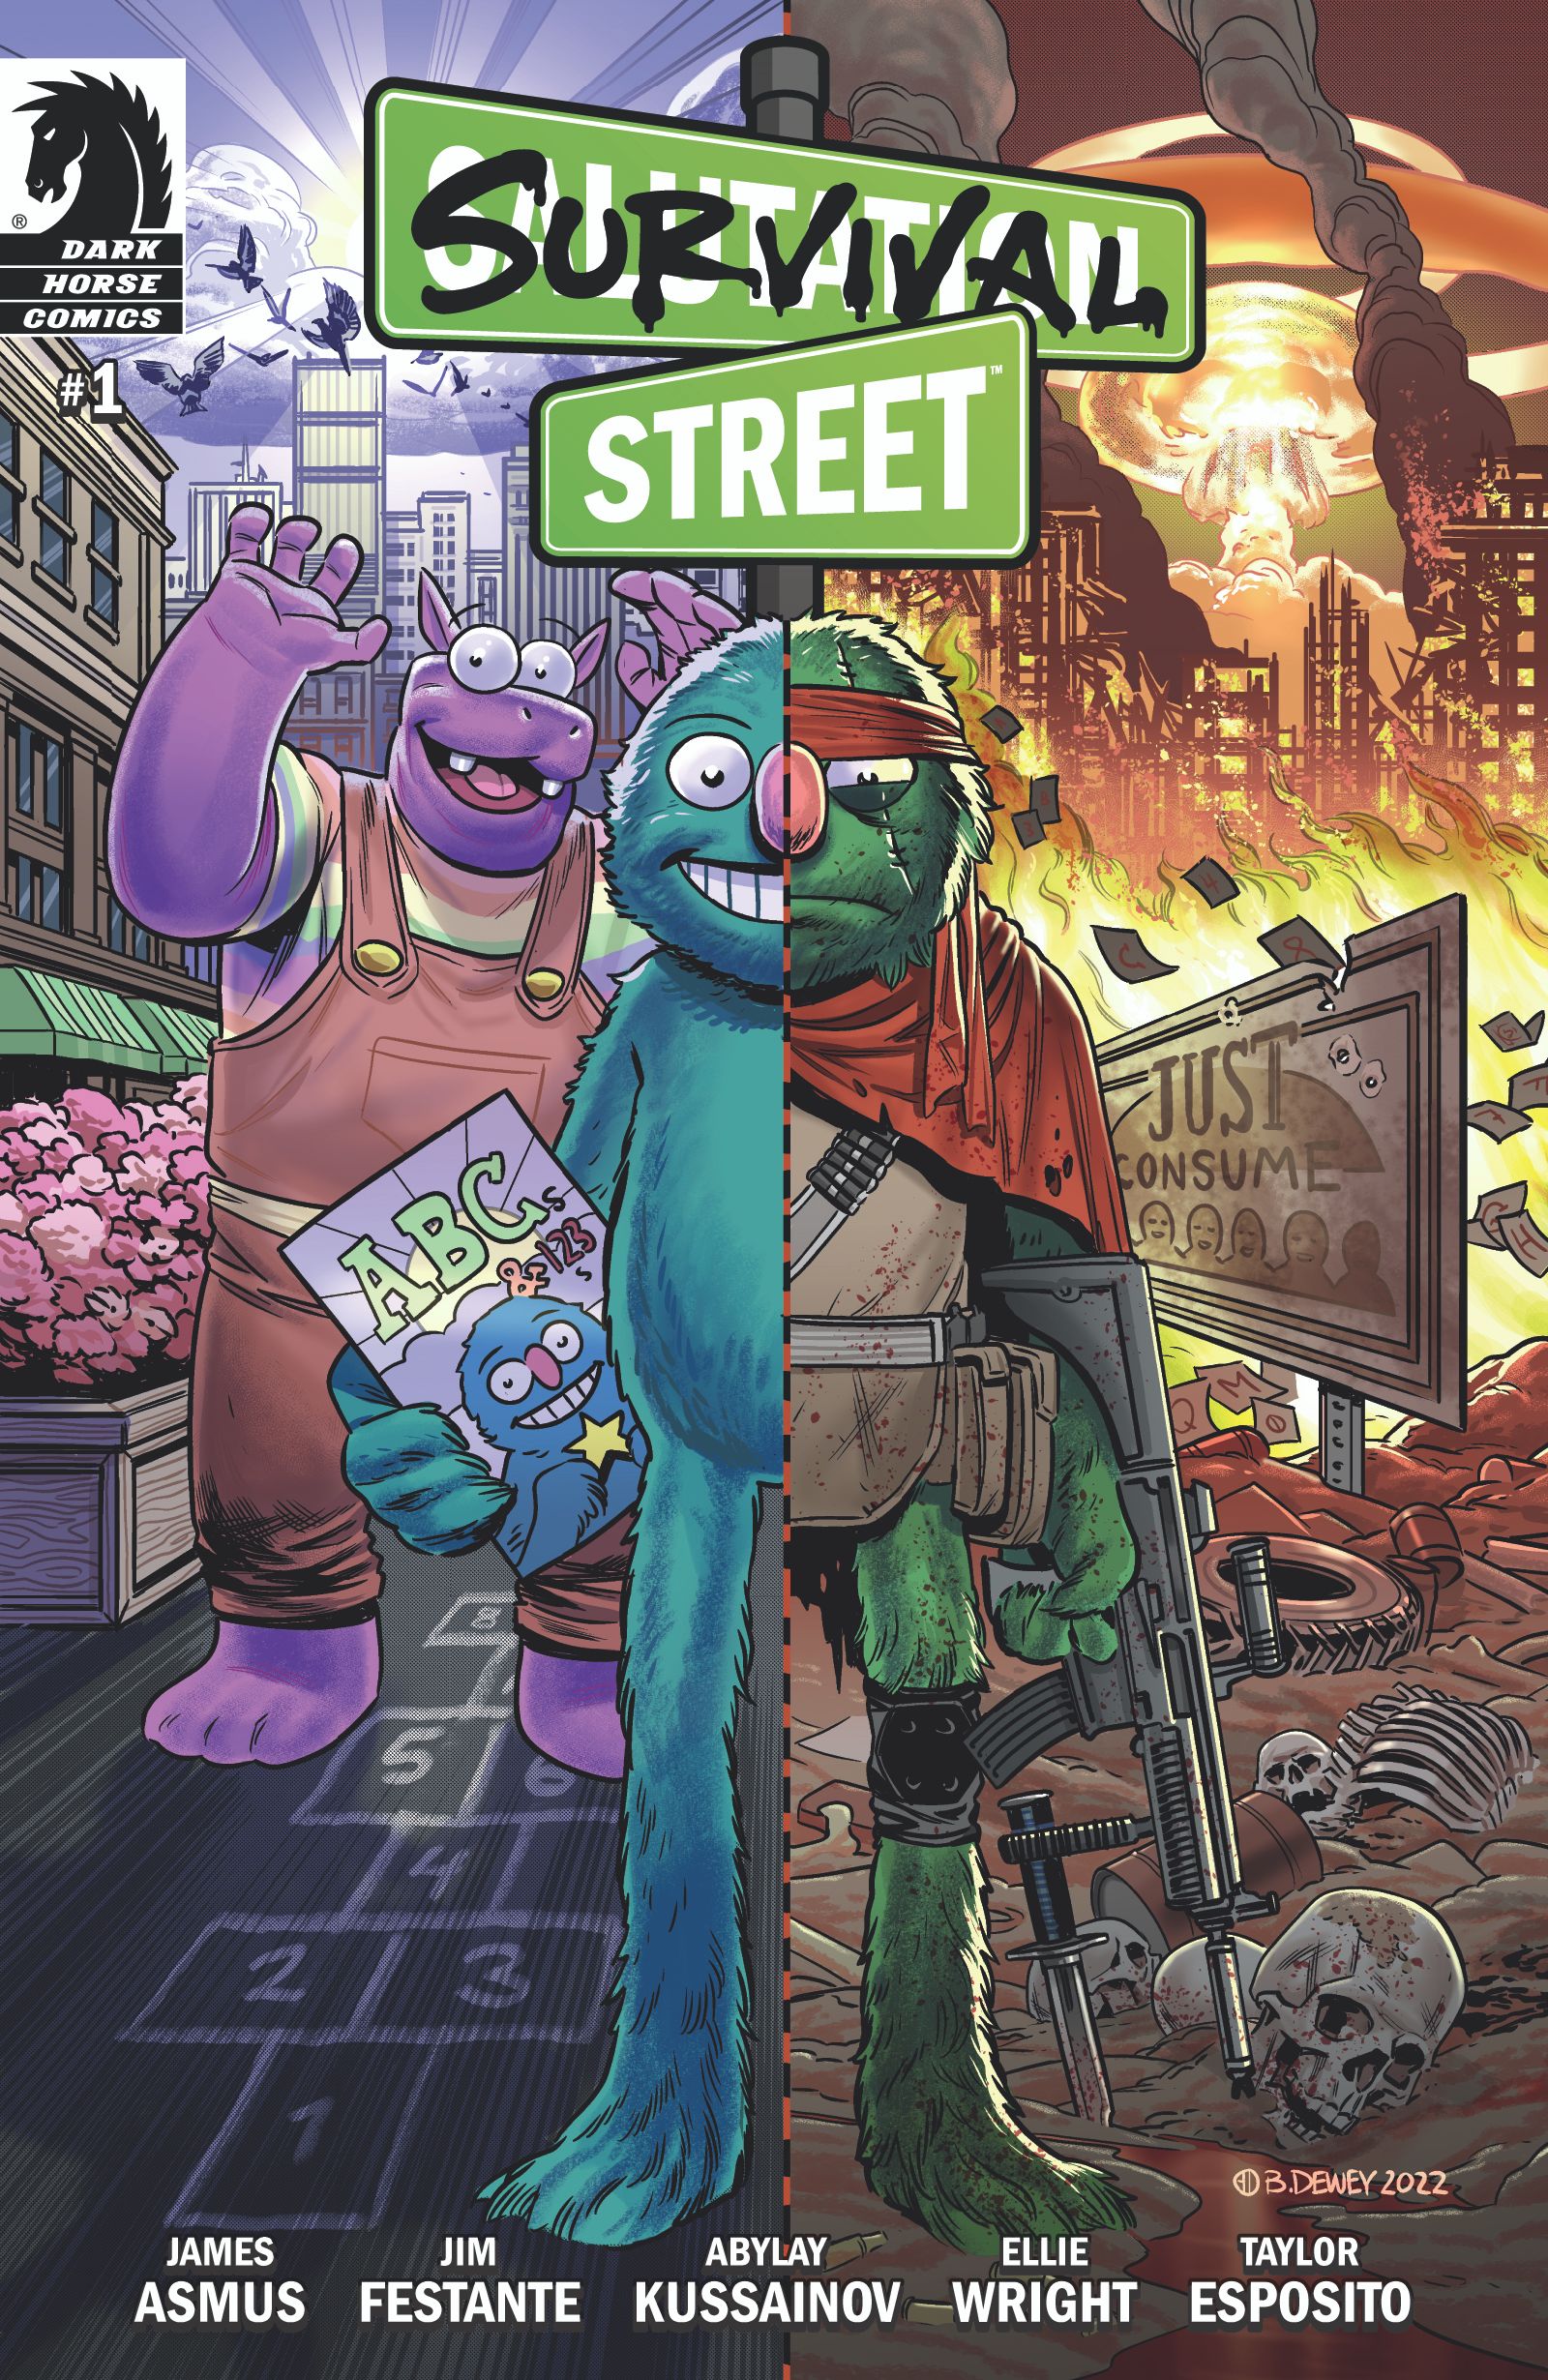 EXCLUSIVE: Sesame Street Becomes a Twisted, Hyper-Violent Nightmare in New Dark Horse Series